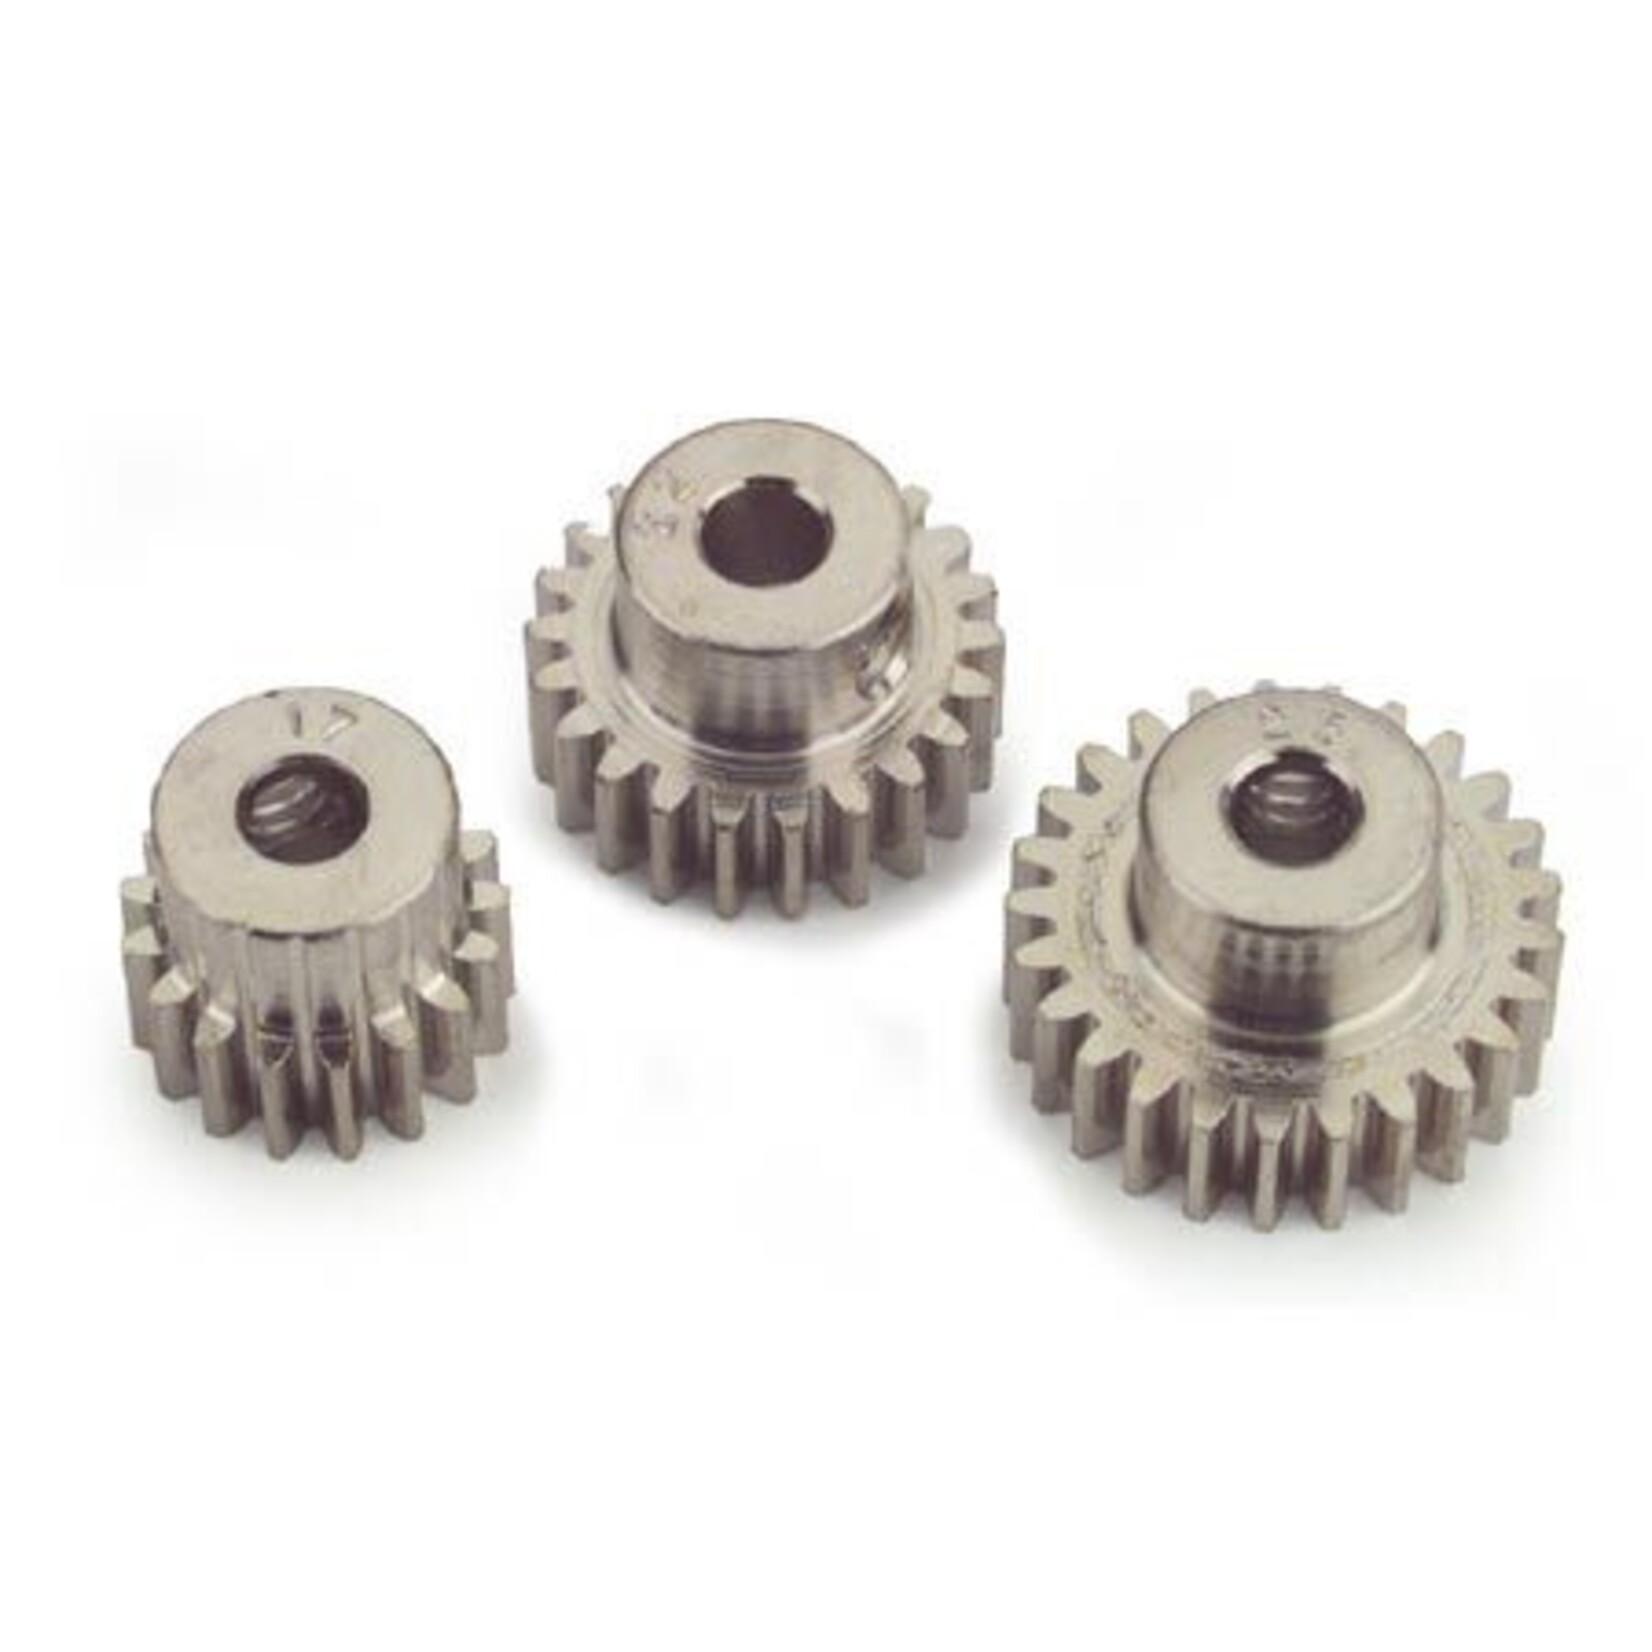 Robinson Racing Products (RRP) 48 Pitch Pinion Gear, 22T